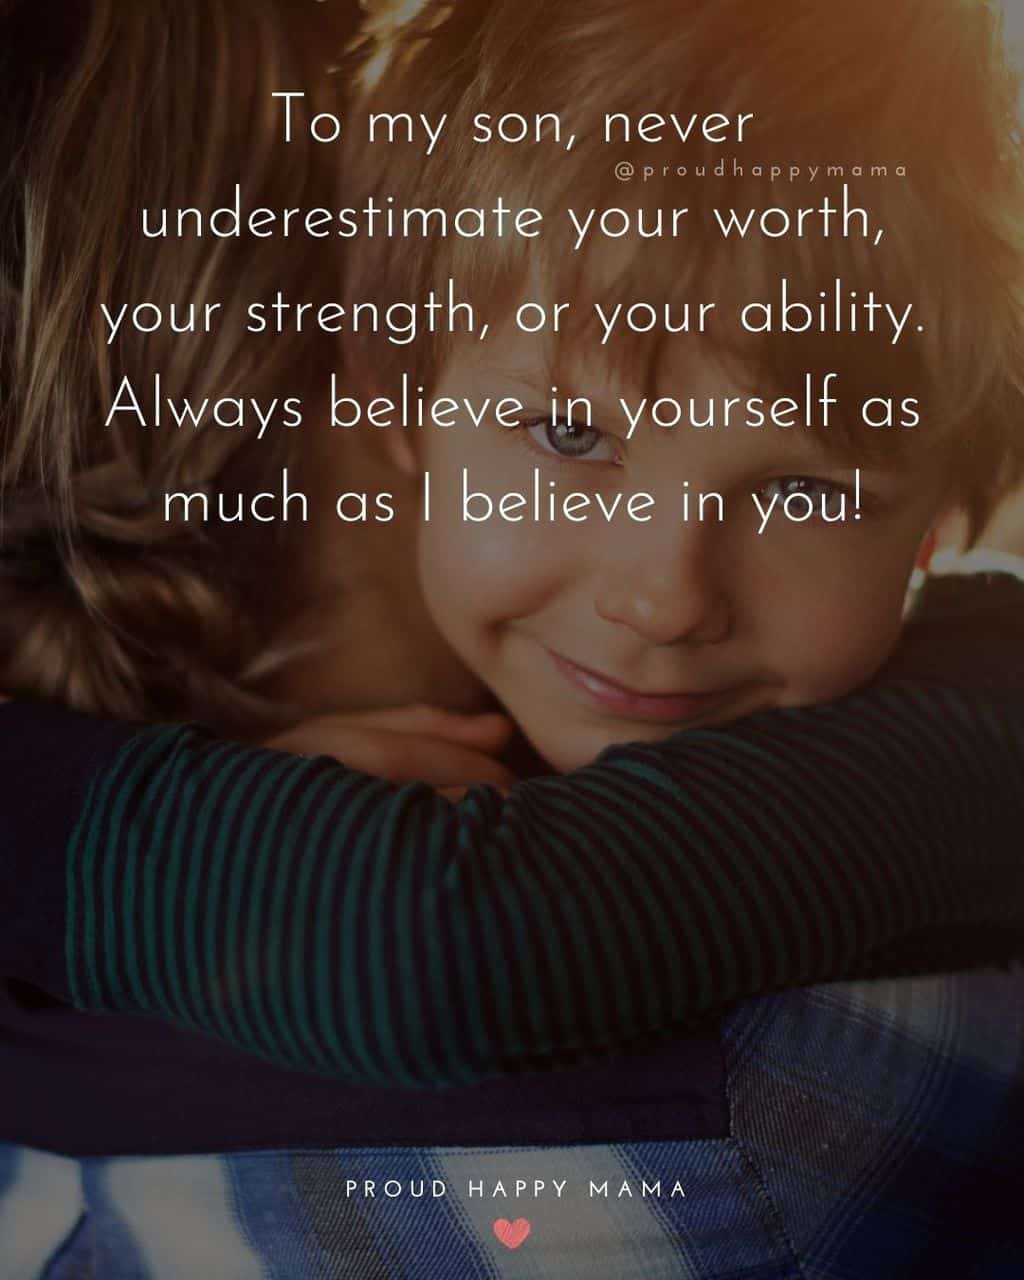 Son Quotes - To my son, never underestimate your worth, your strength, or your ability. Always believe in yourself as much as I